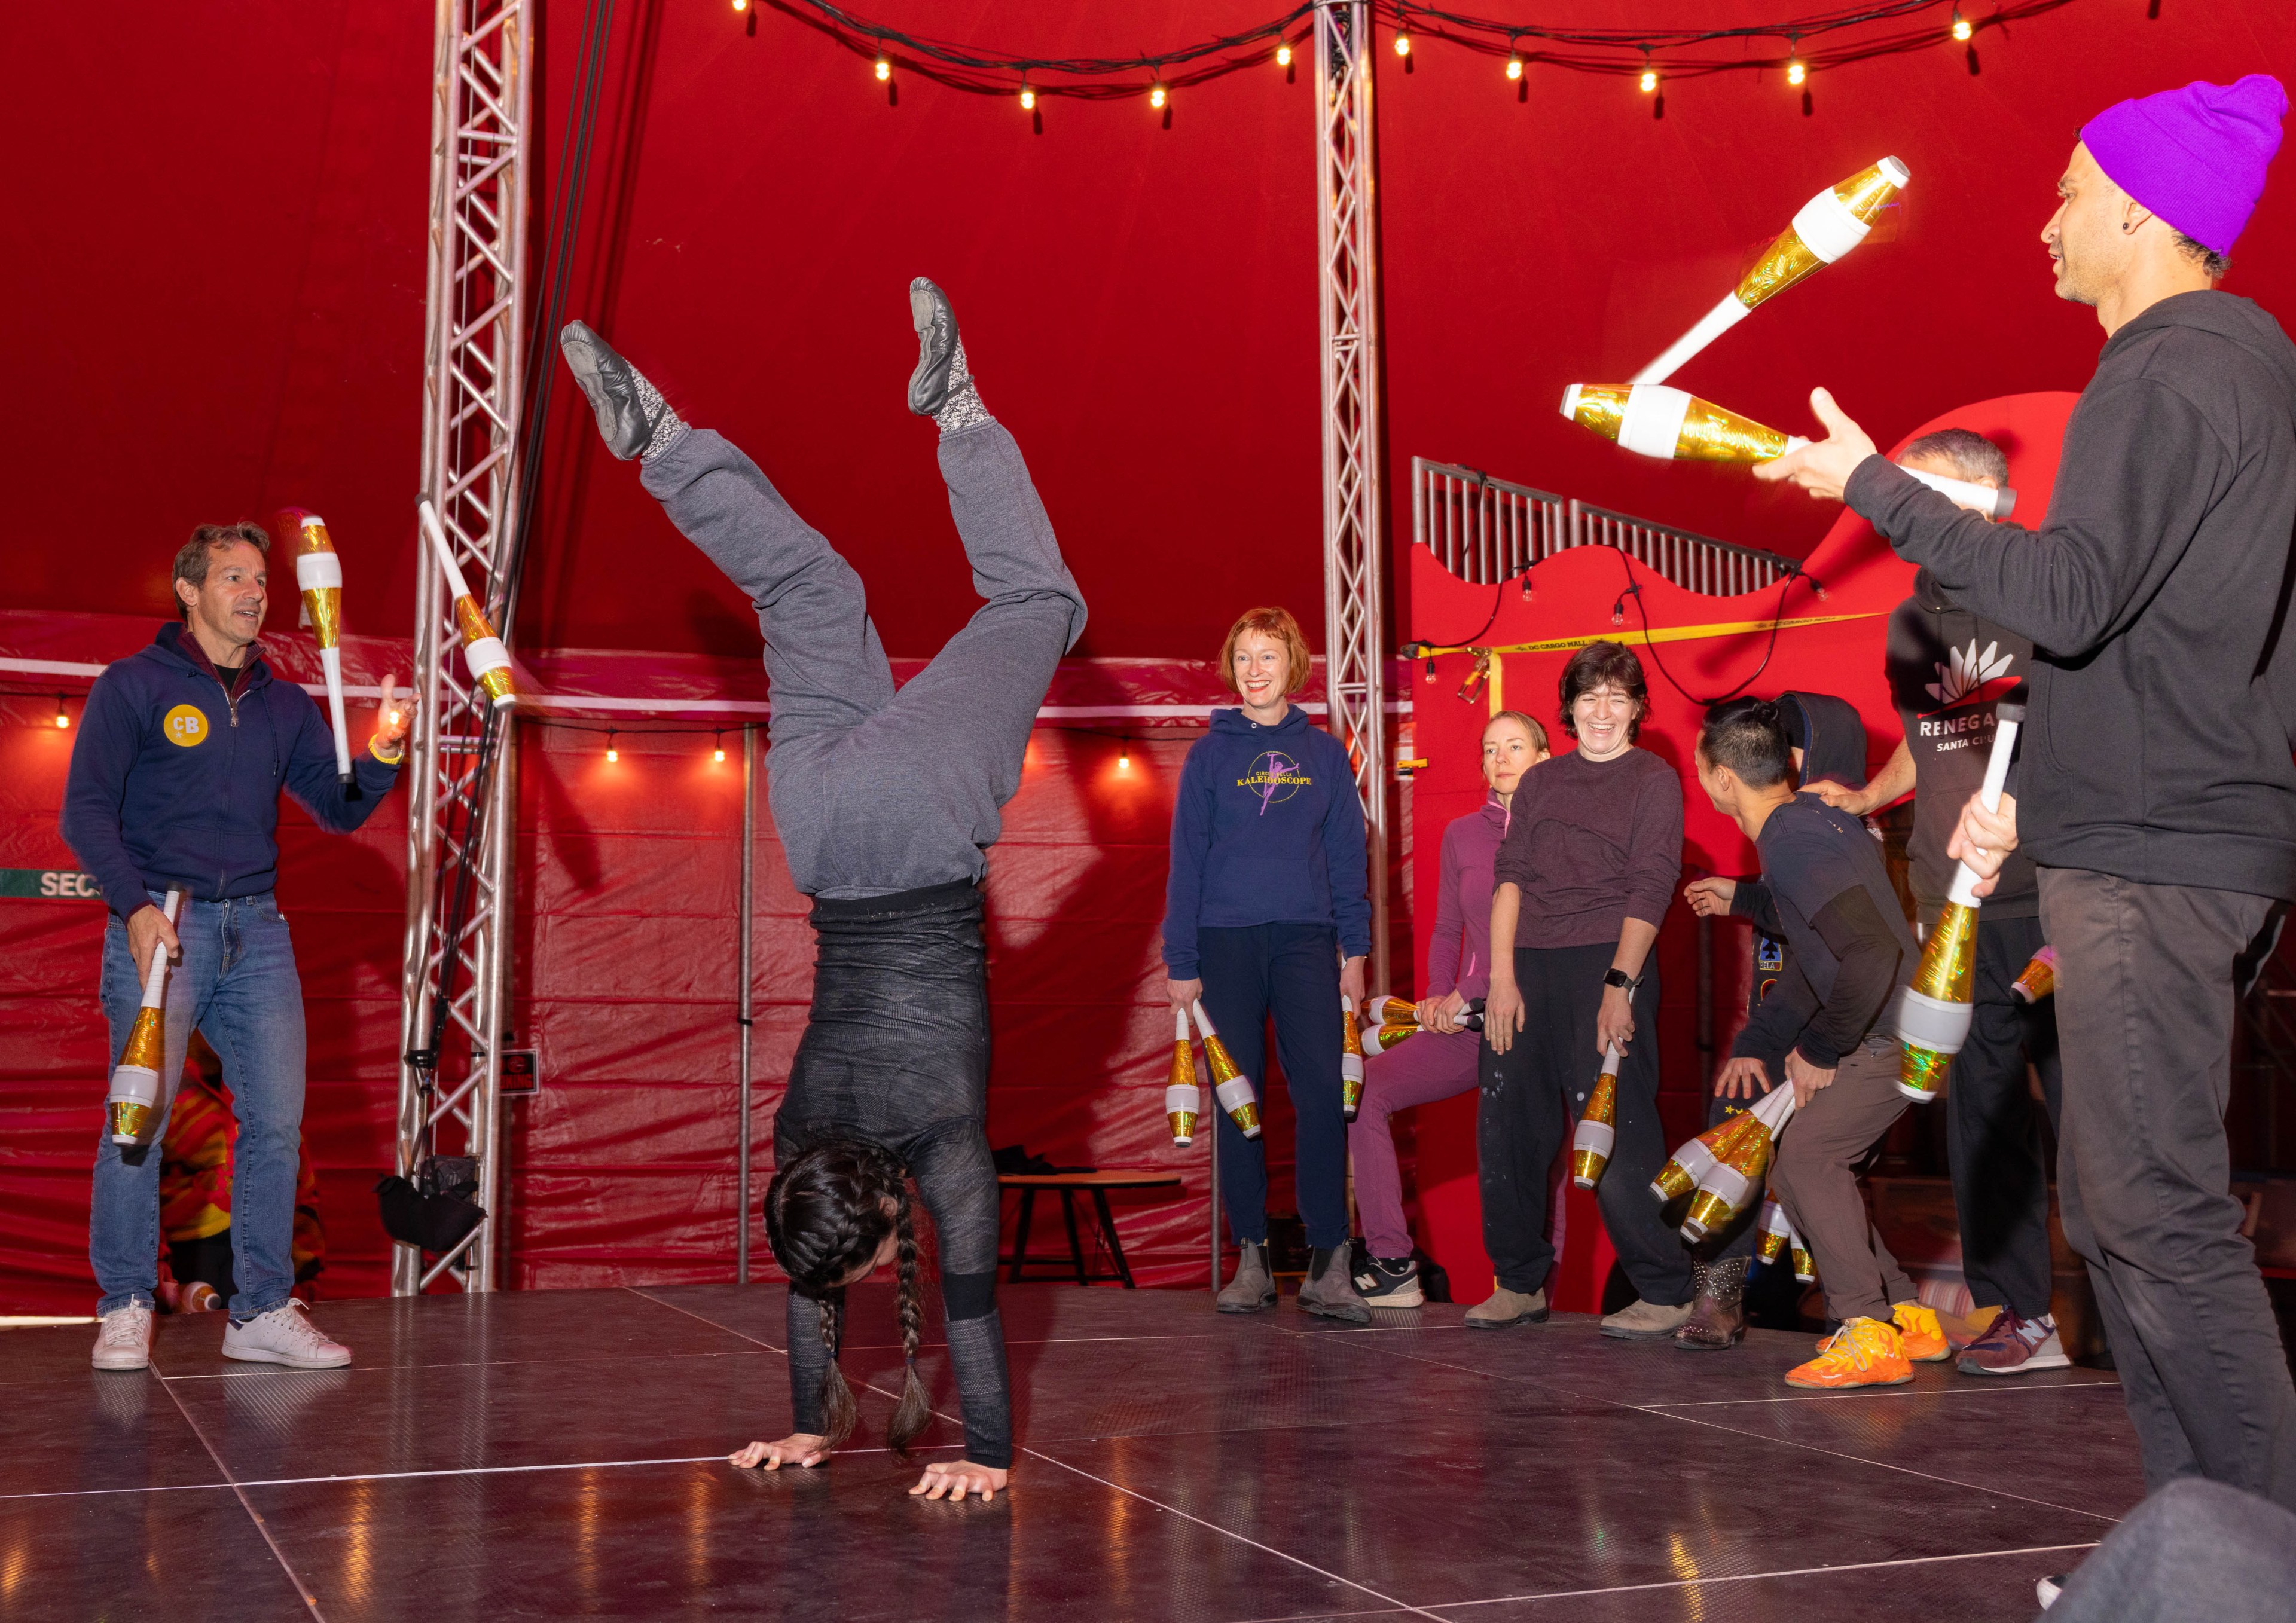 A group of people gather around someone doing a handstand while others juggle.